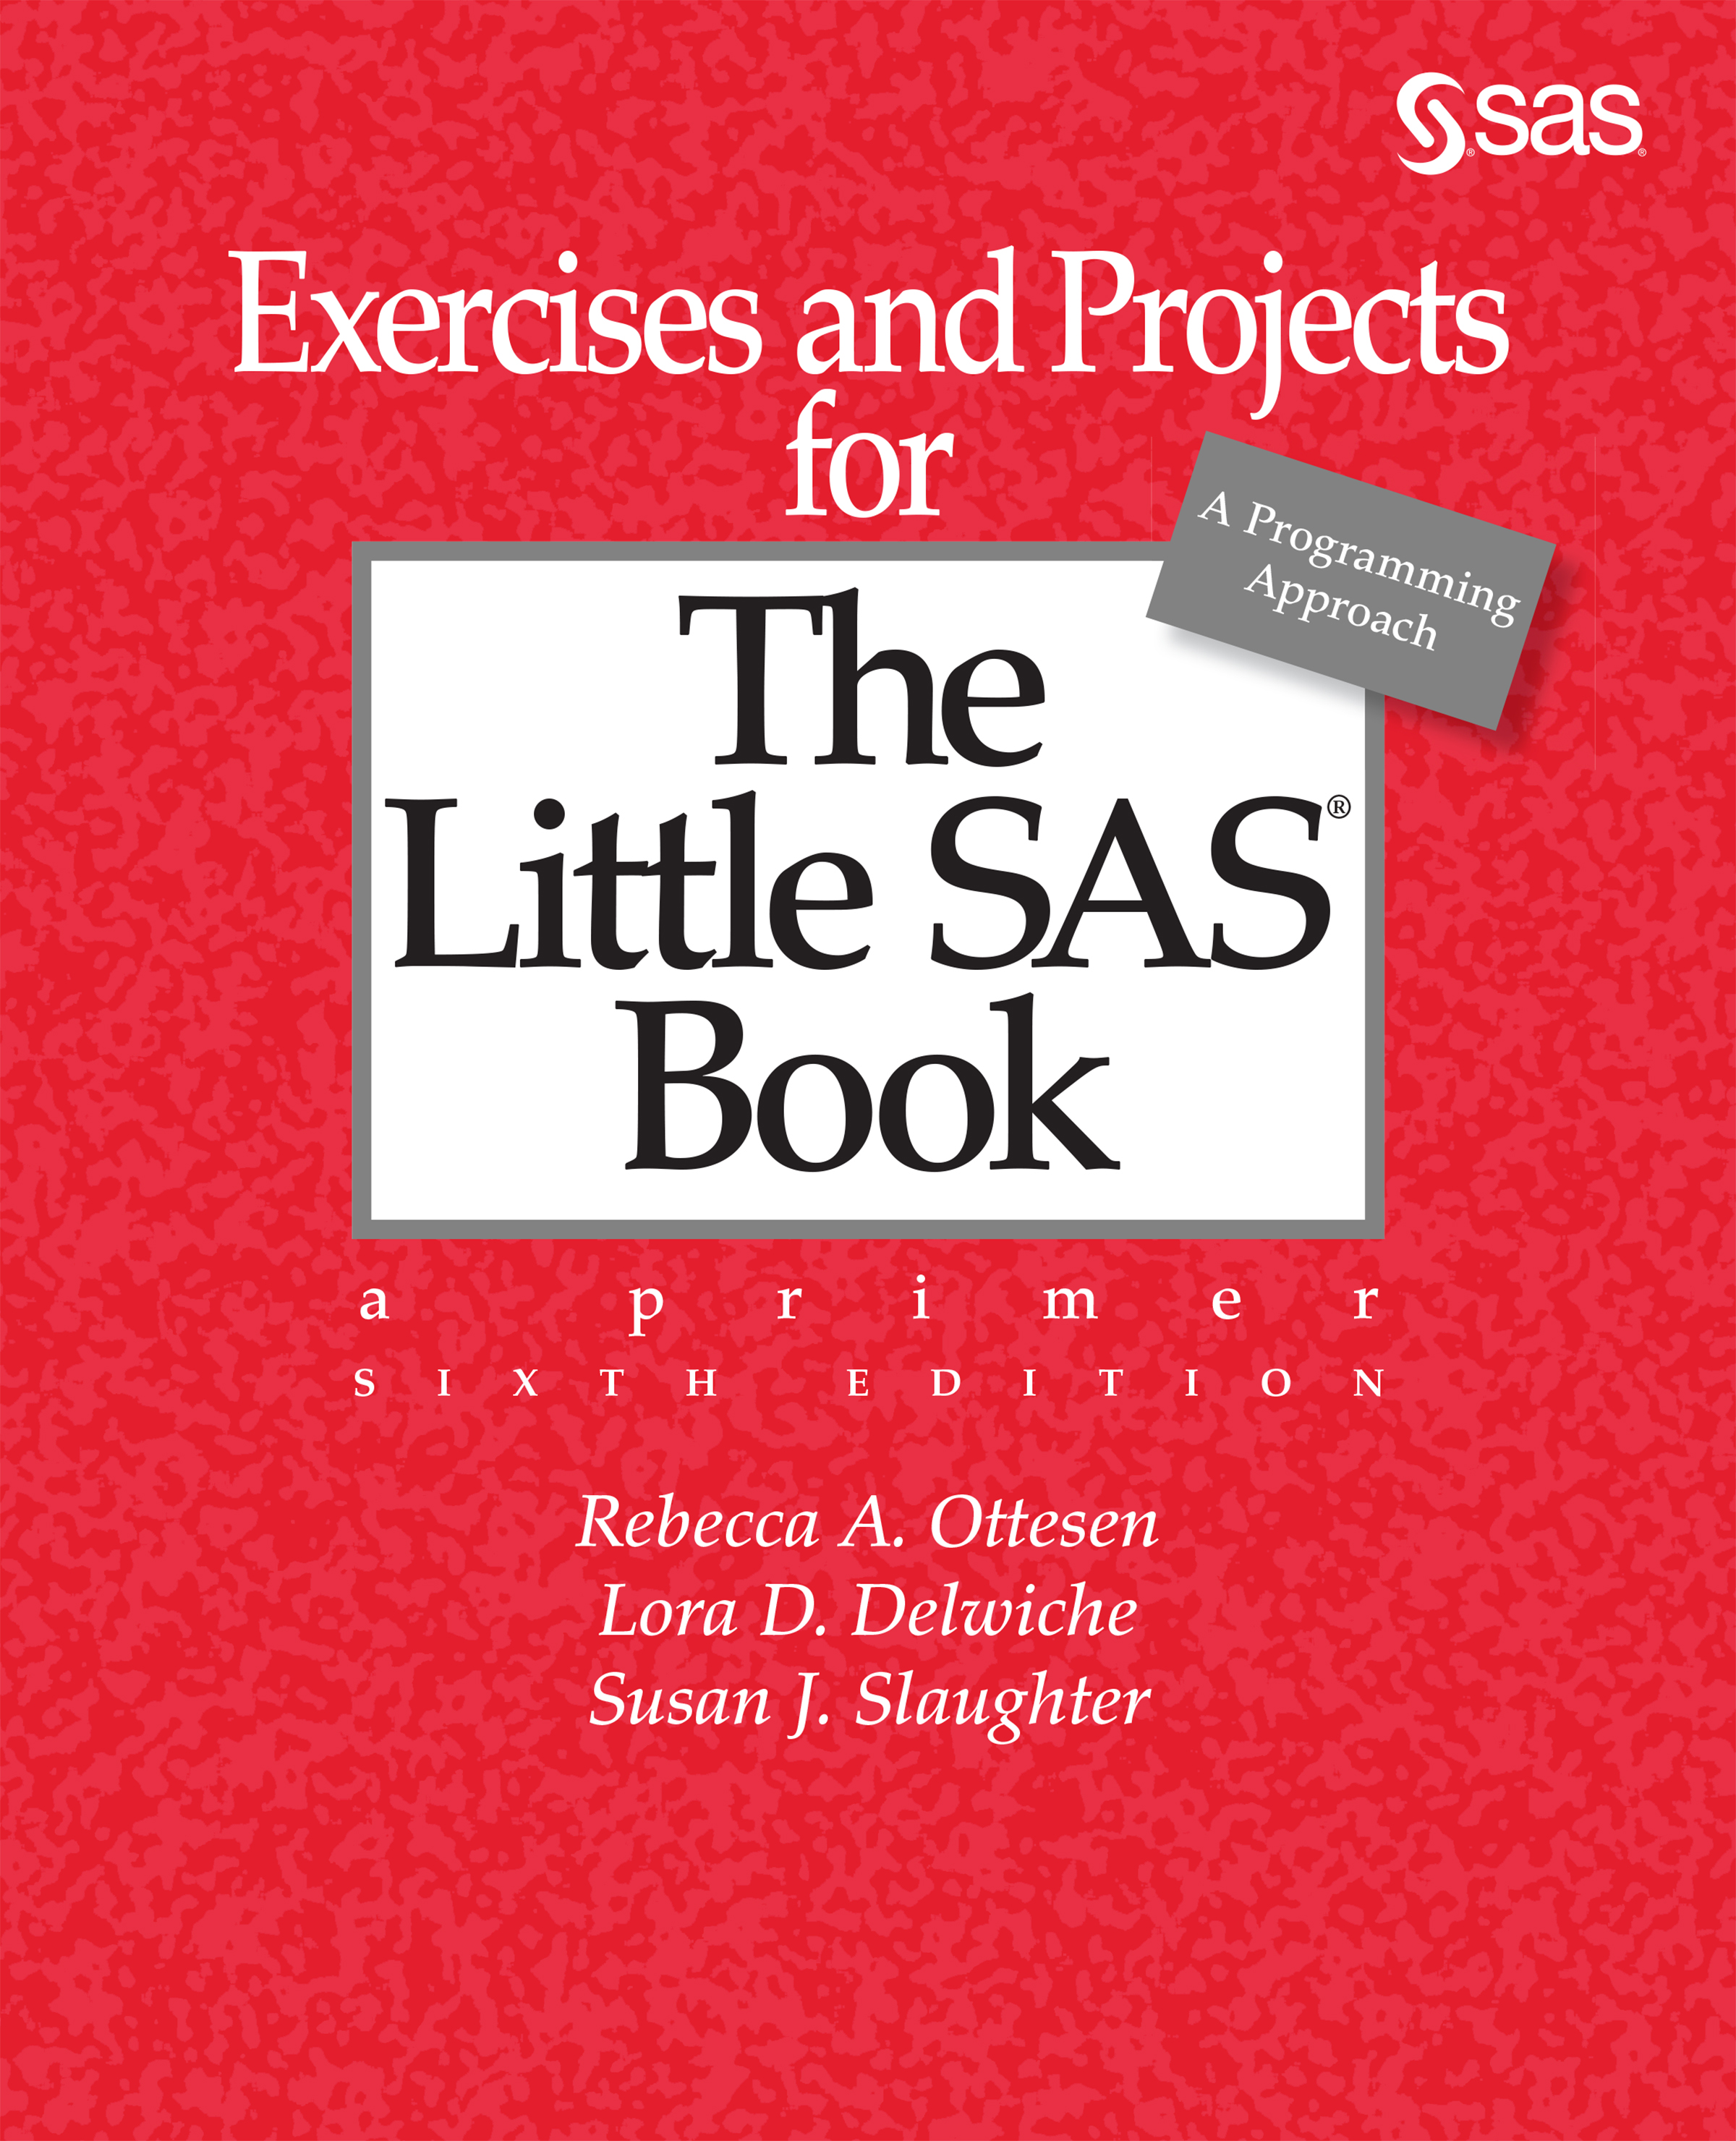 Exercises and Projects for The Little SAS Book, Sixth Edition - Lora D. Del...